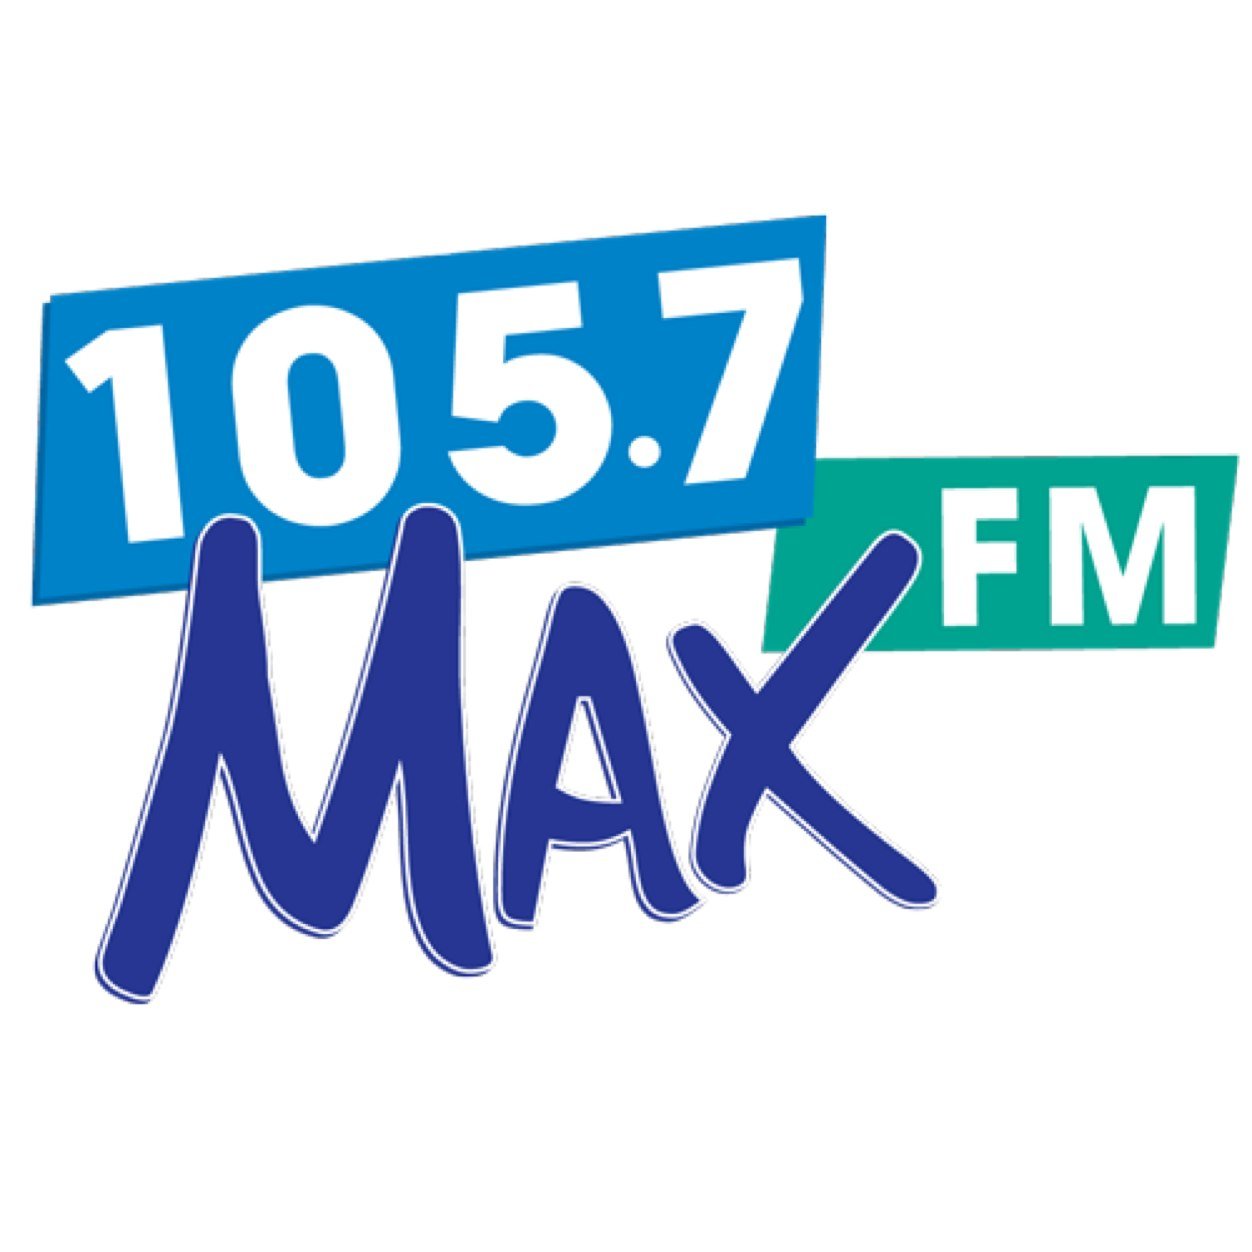 105.7 MAX FM is San Diego's Throwback Station! The #80sPlayHere Michael Jackson, Journey Madonna, Bon Jovi, Prince and more! Download the #1057MAXFM Mobile App!